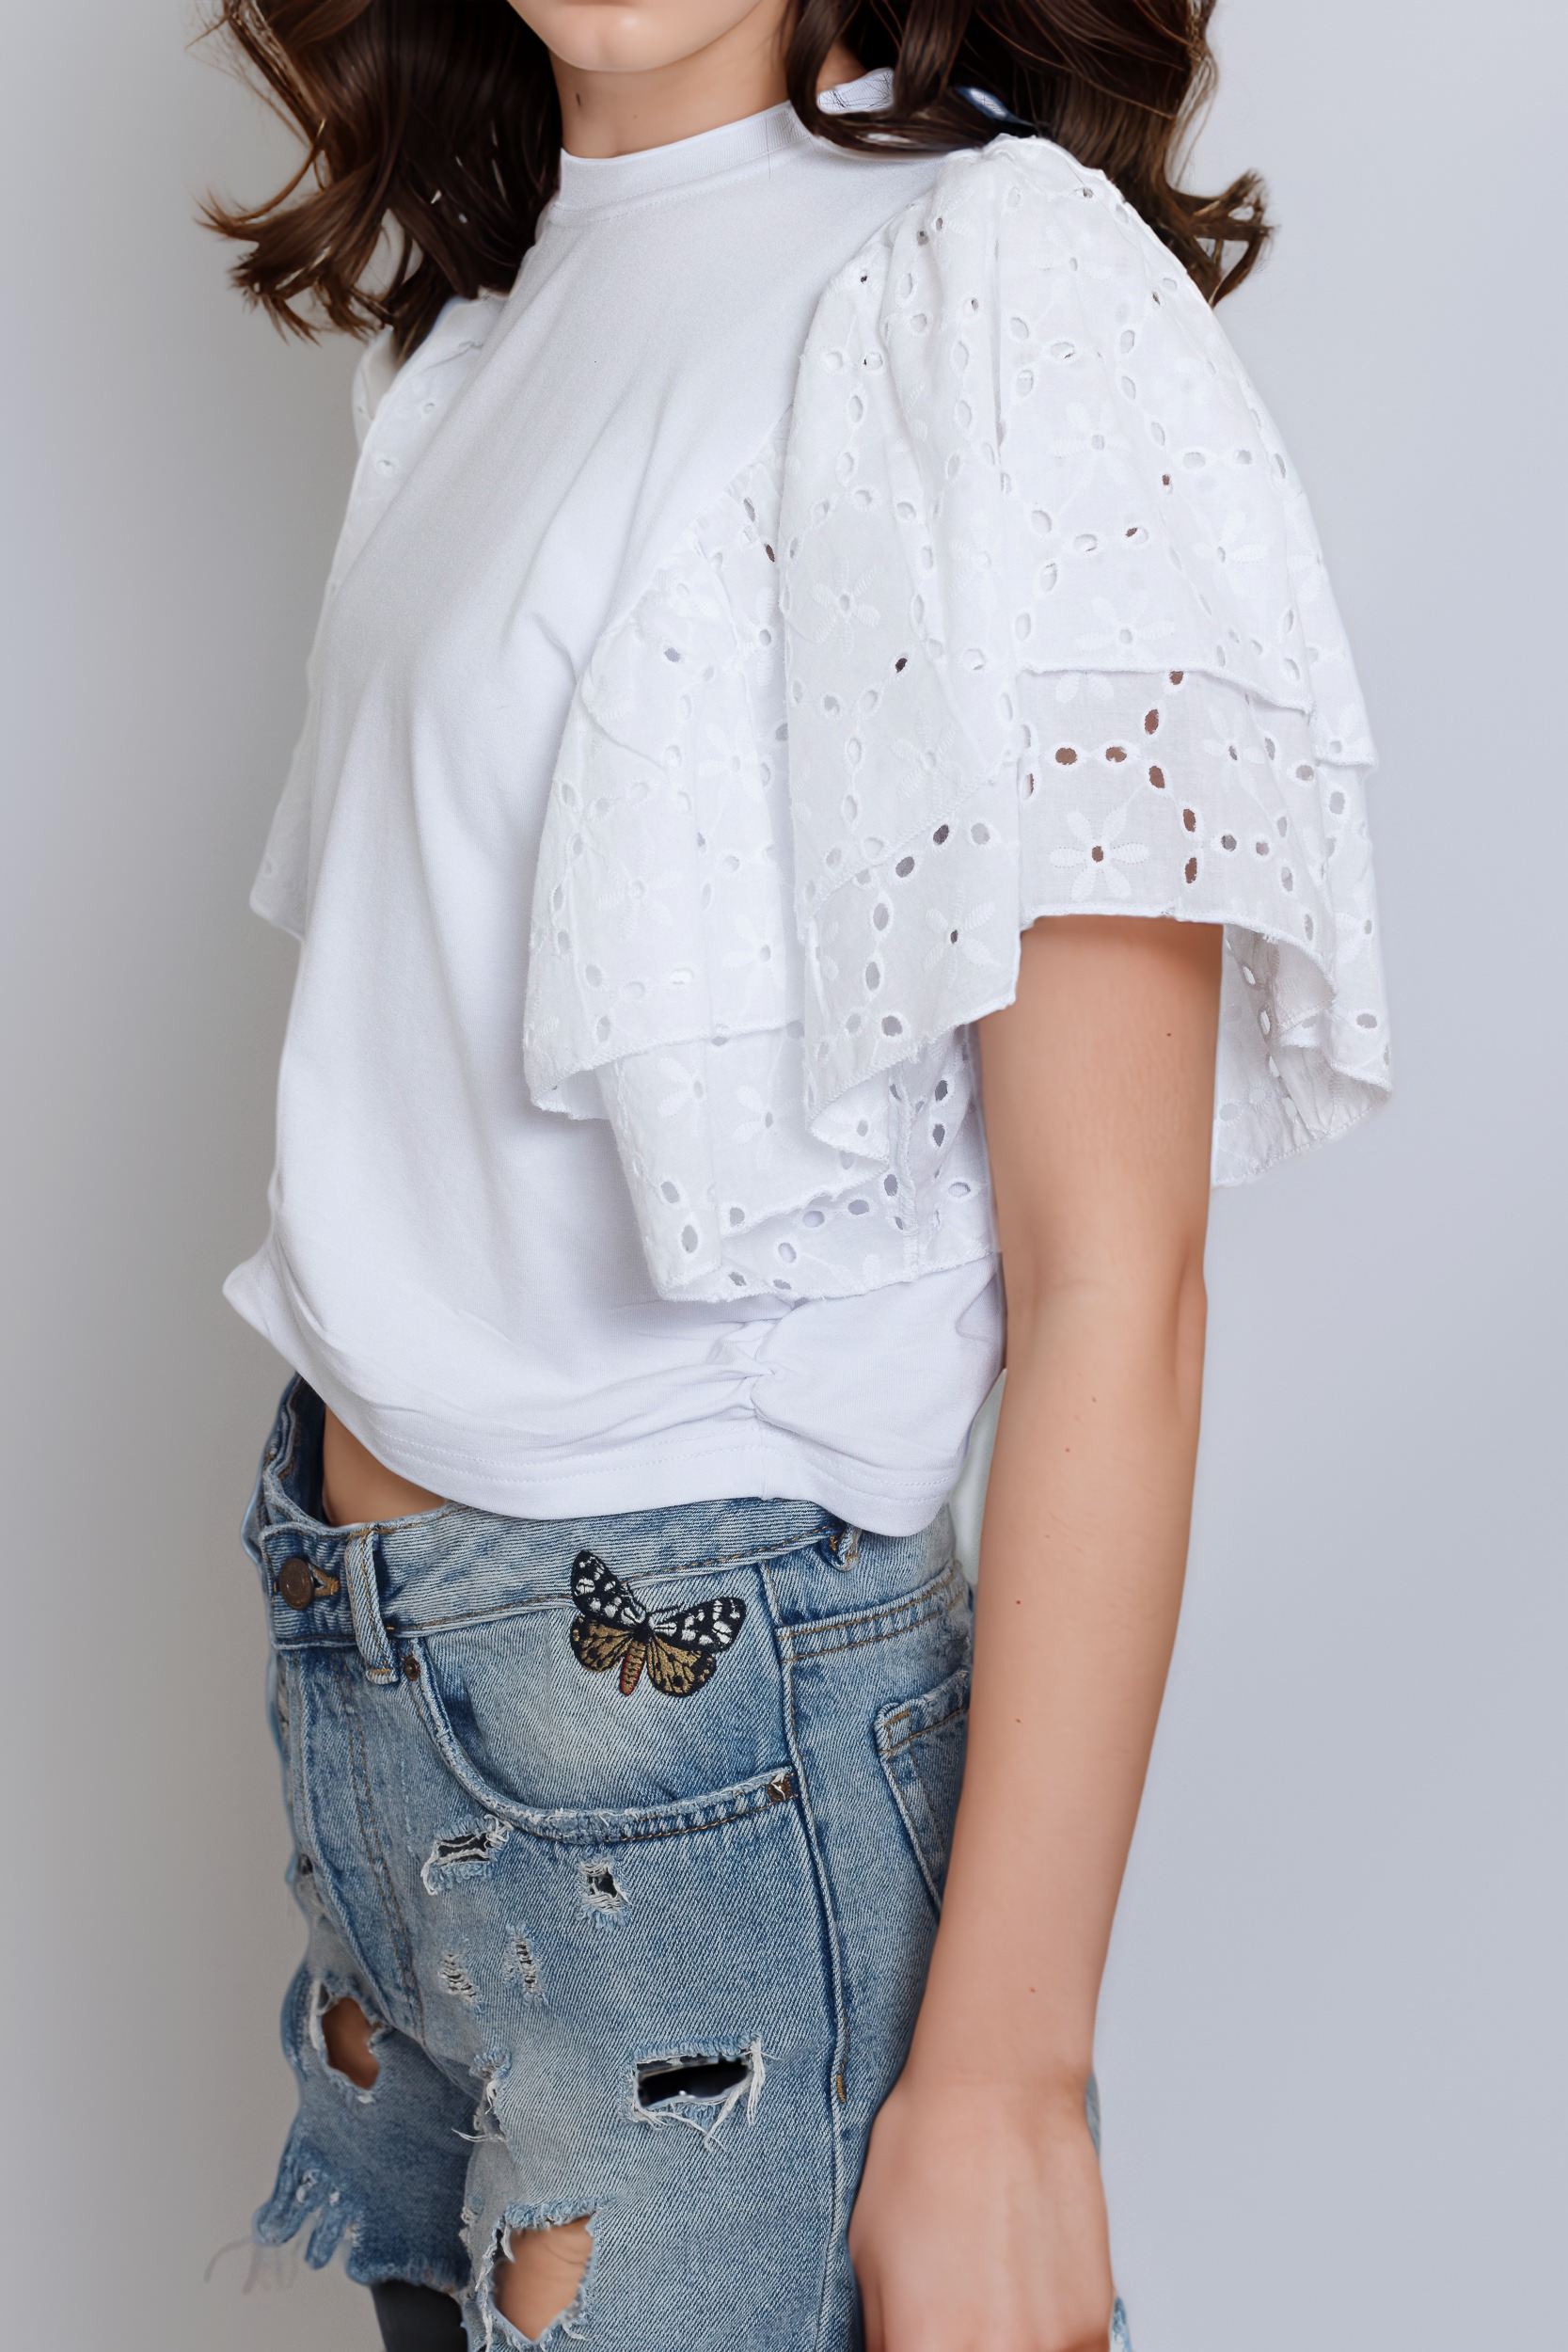 Cropped Top With Broderie Anglaise Sleeves For Women - White